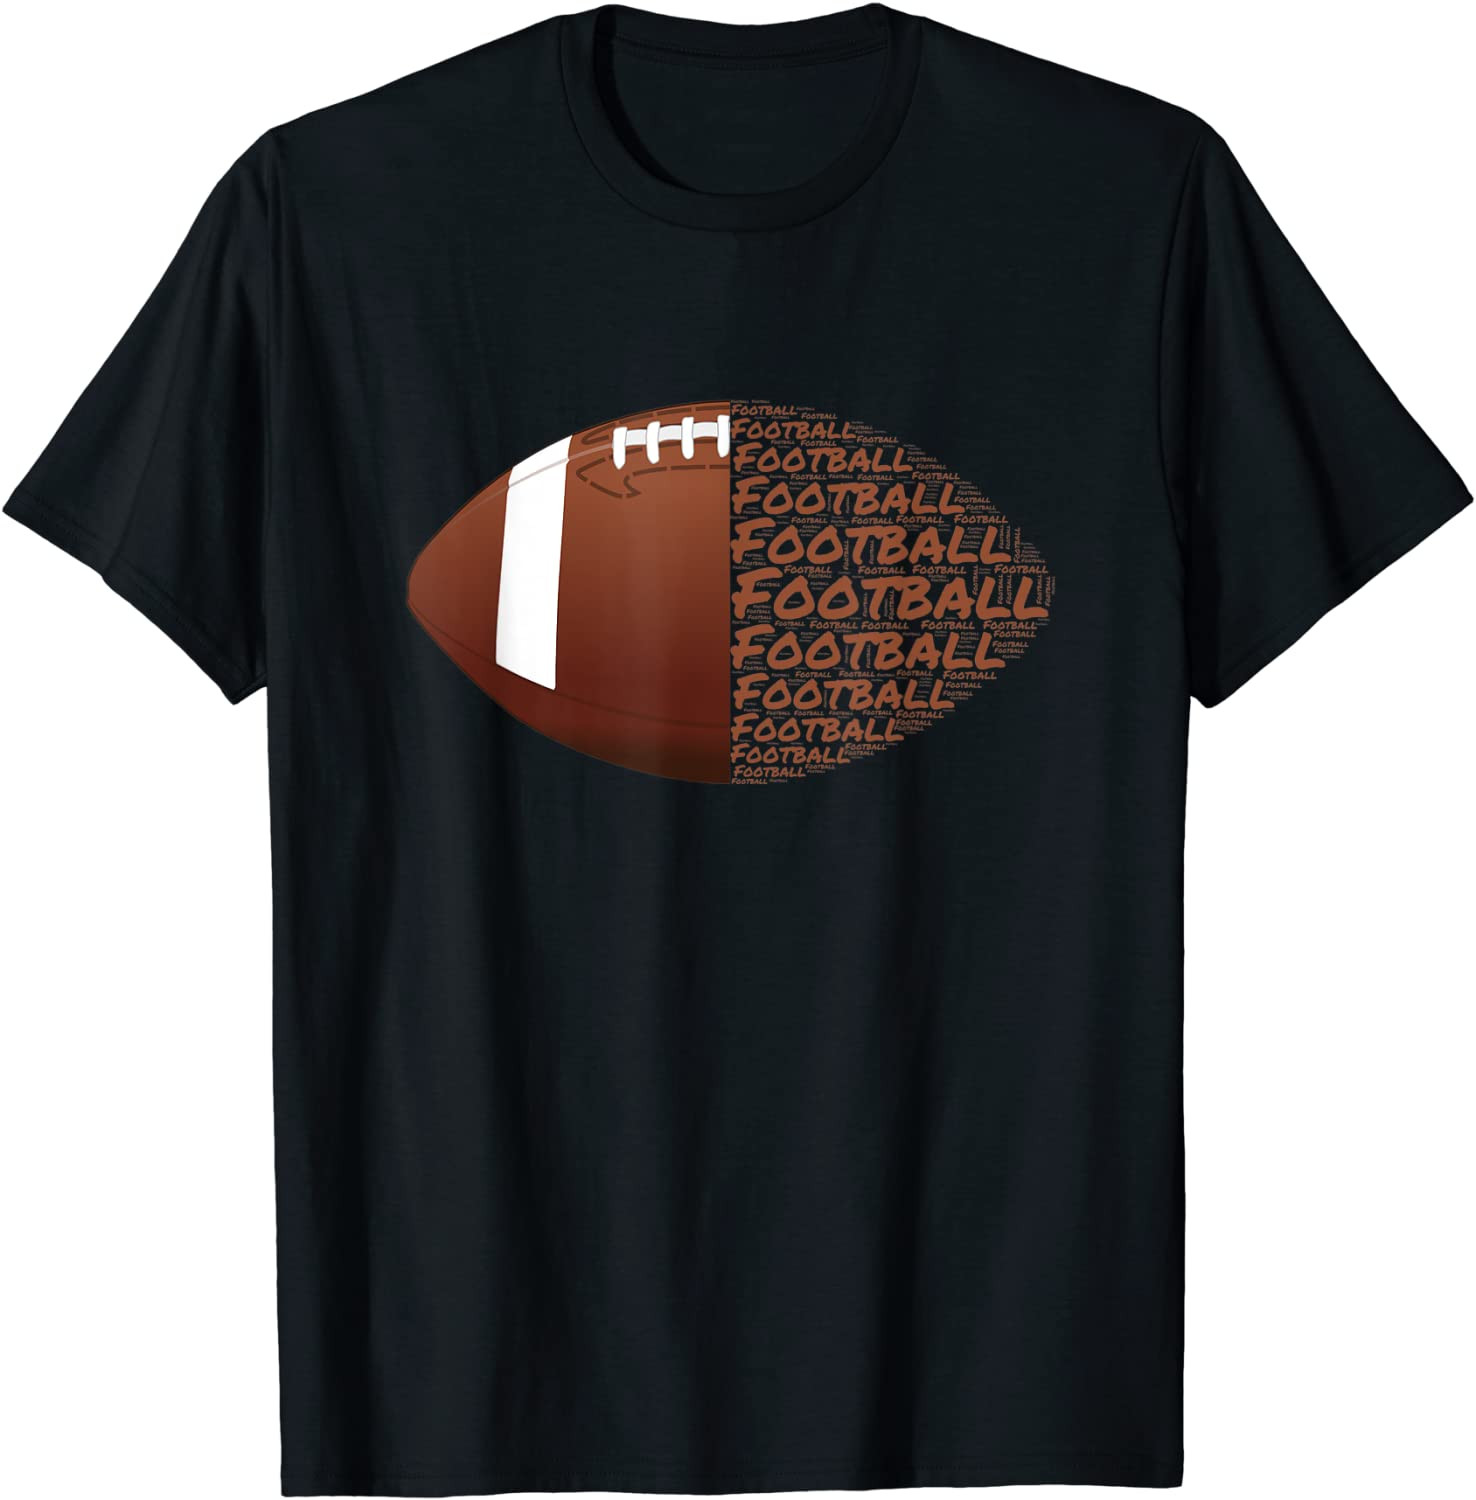 Awesome Vintage Football Quarterback Offensive Player T-Shirt